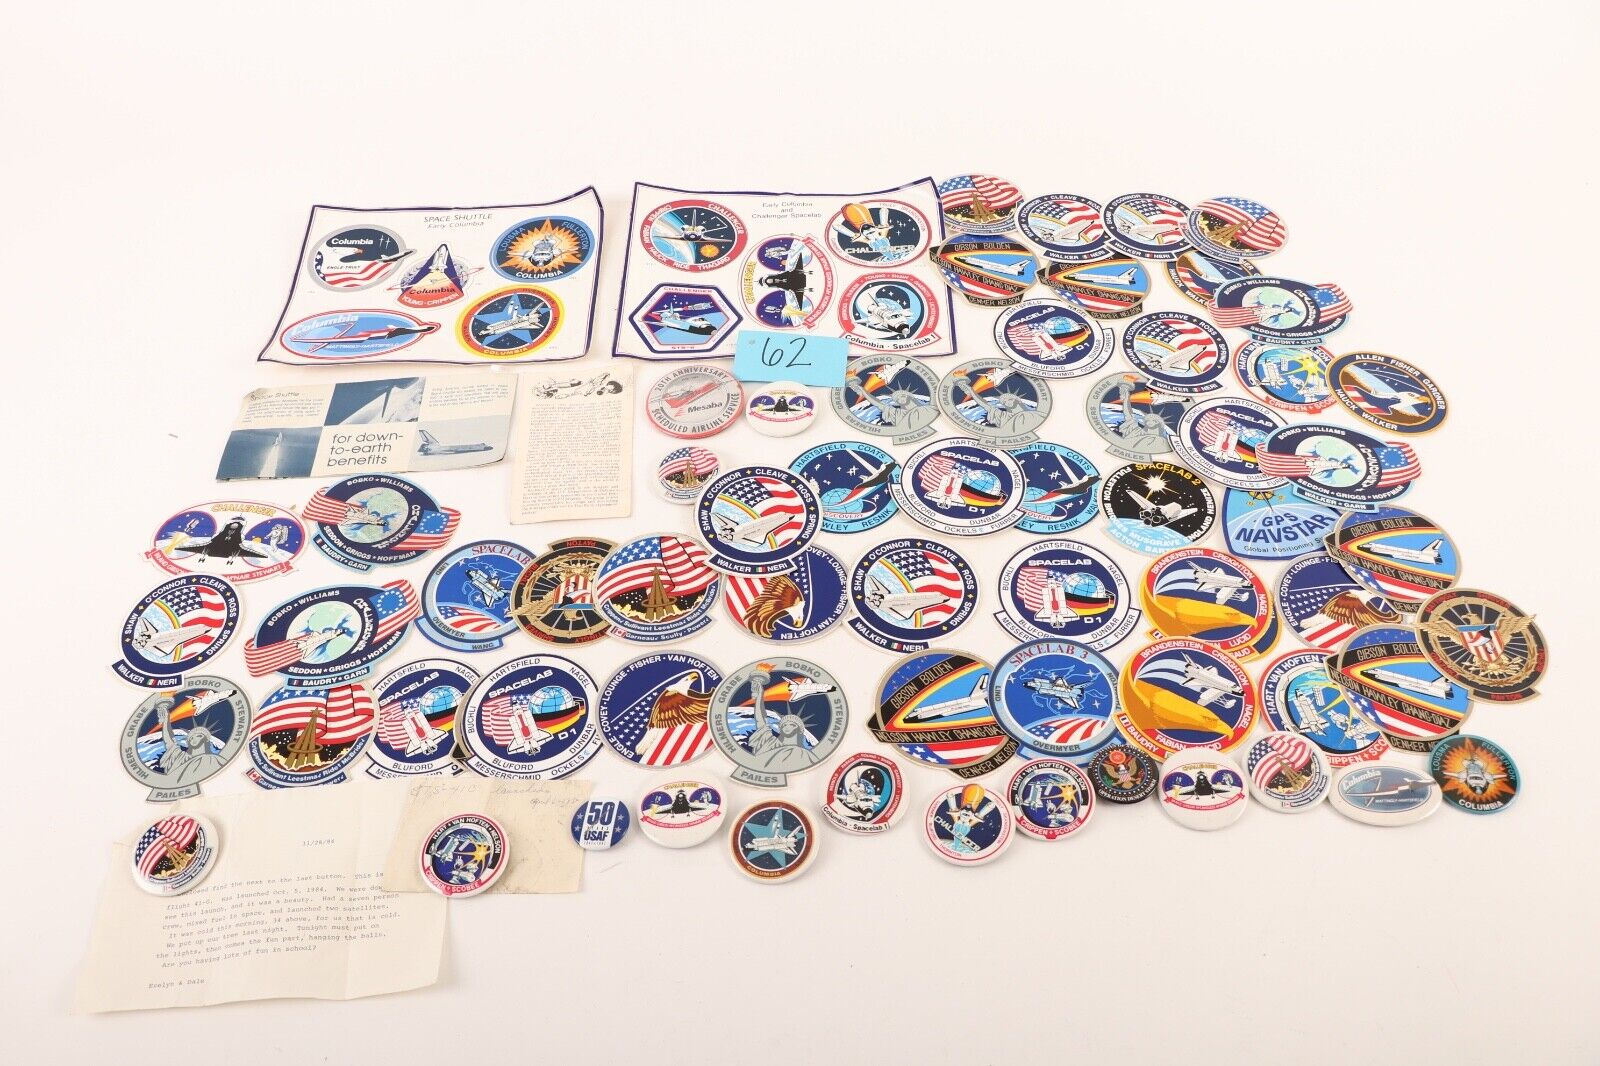 Superb Huge Archive Collection Of NASA Pinbacks and Mission Stickers